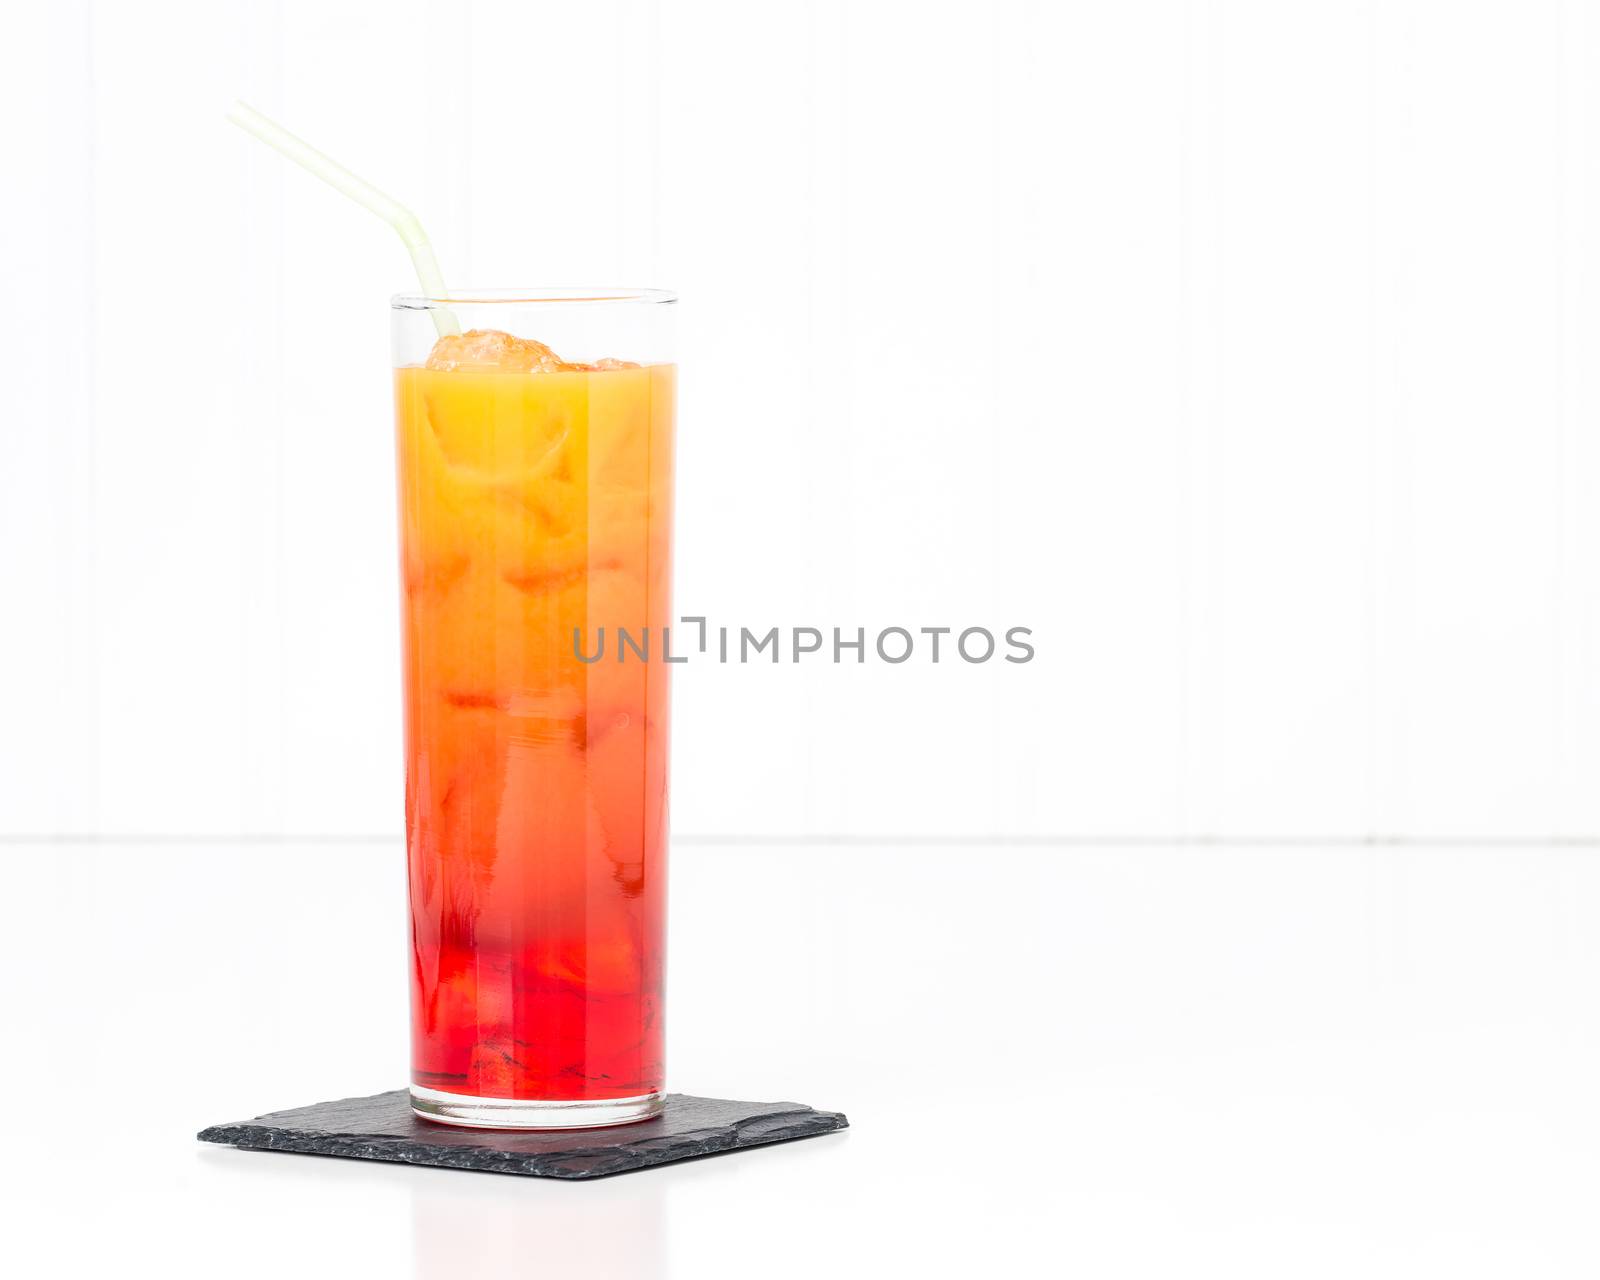 Tropical cocktail known as a tequila sunrise in a tall glass.